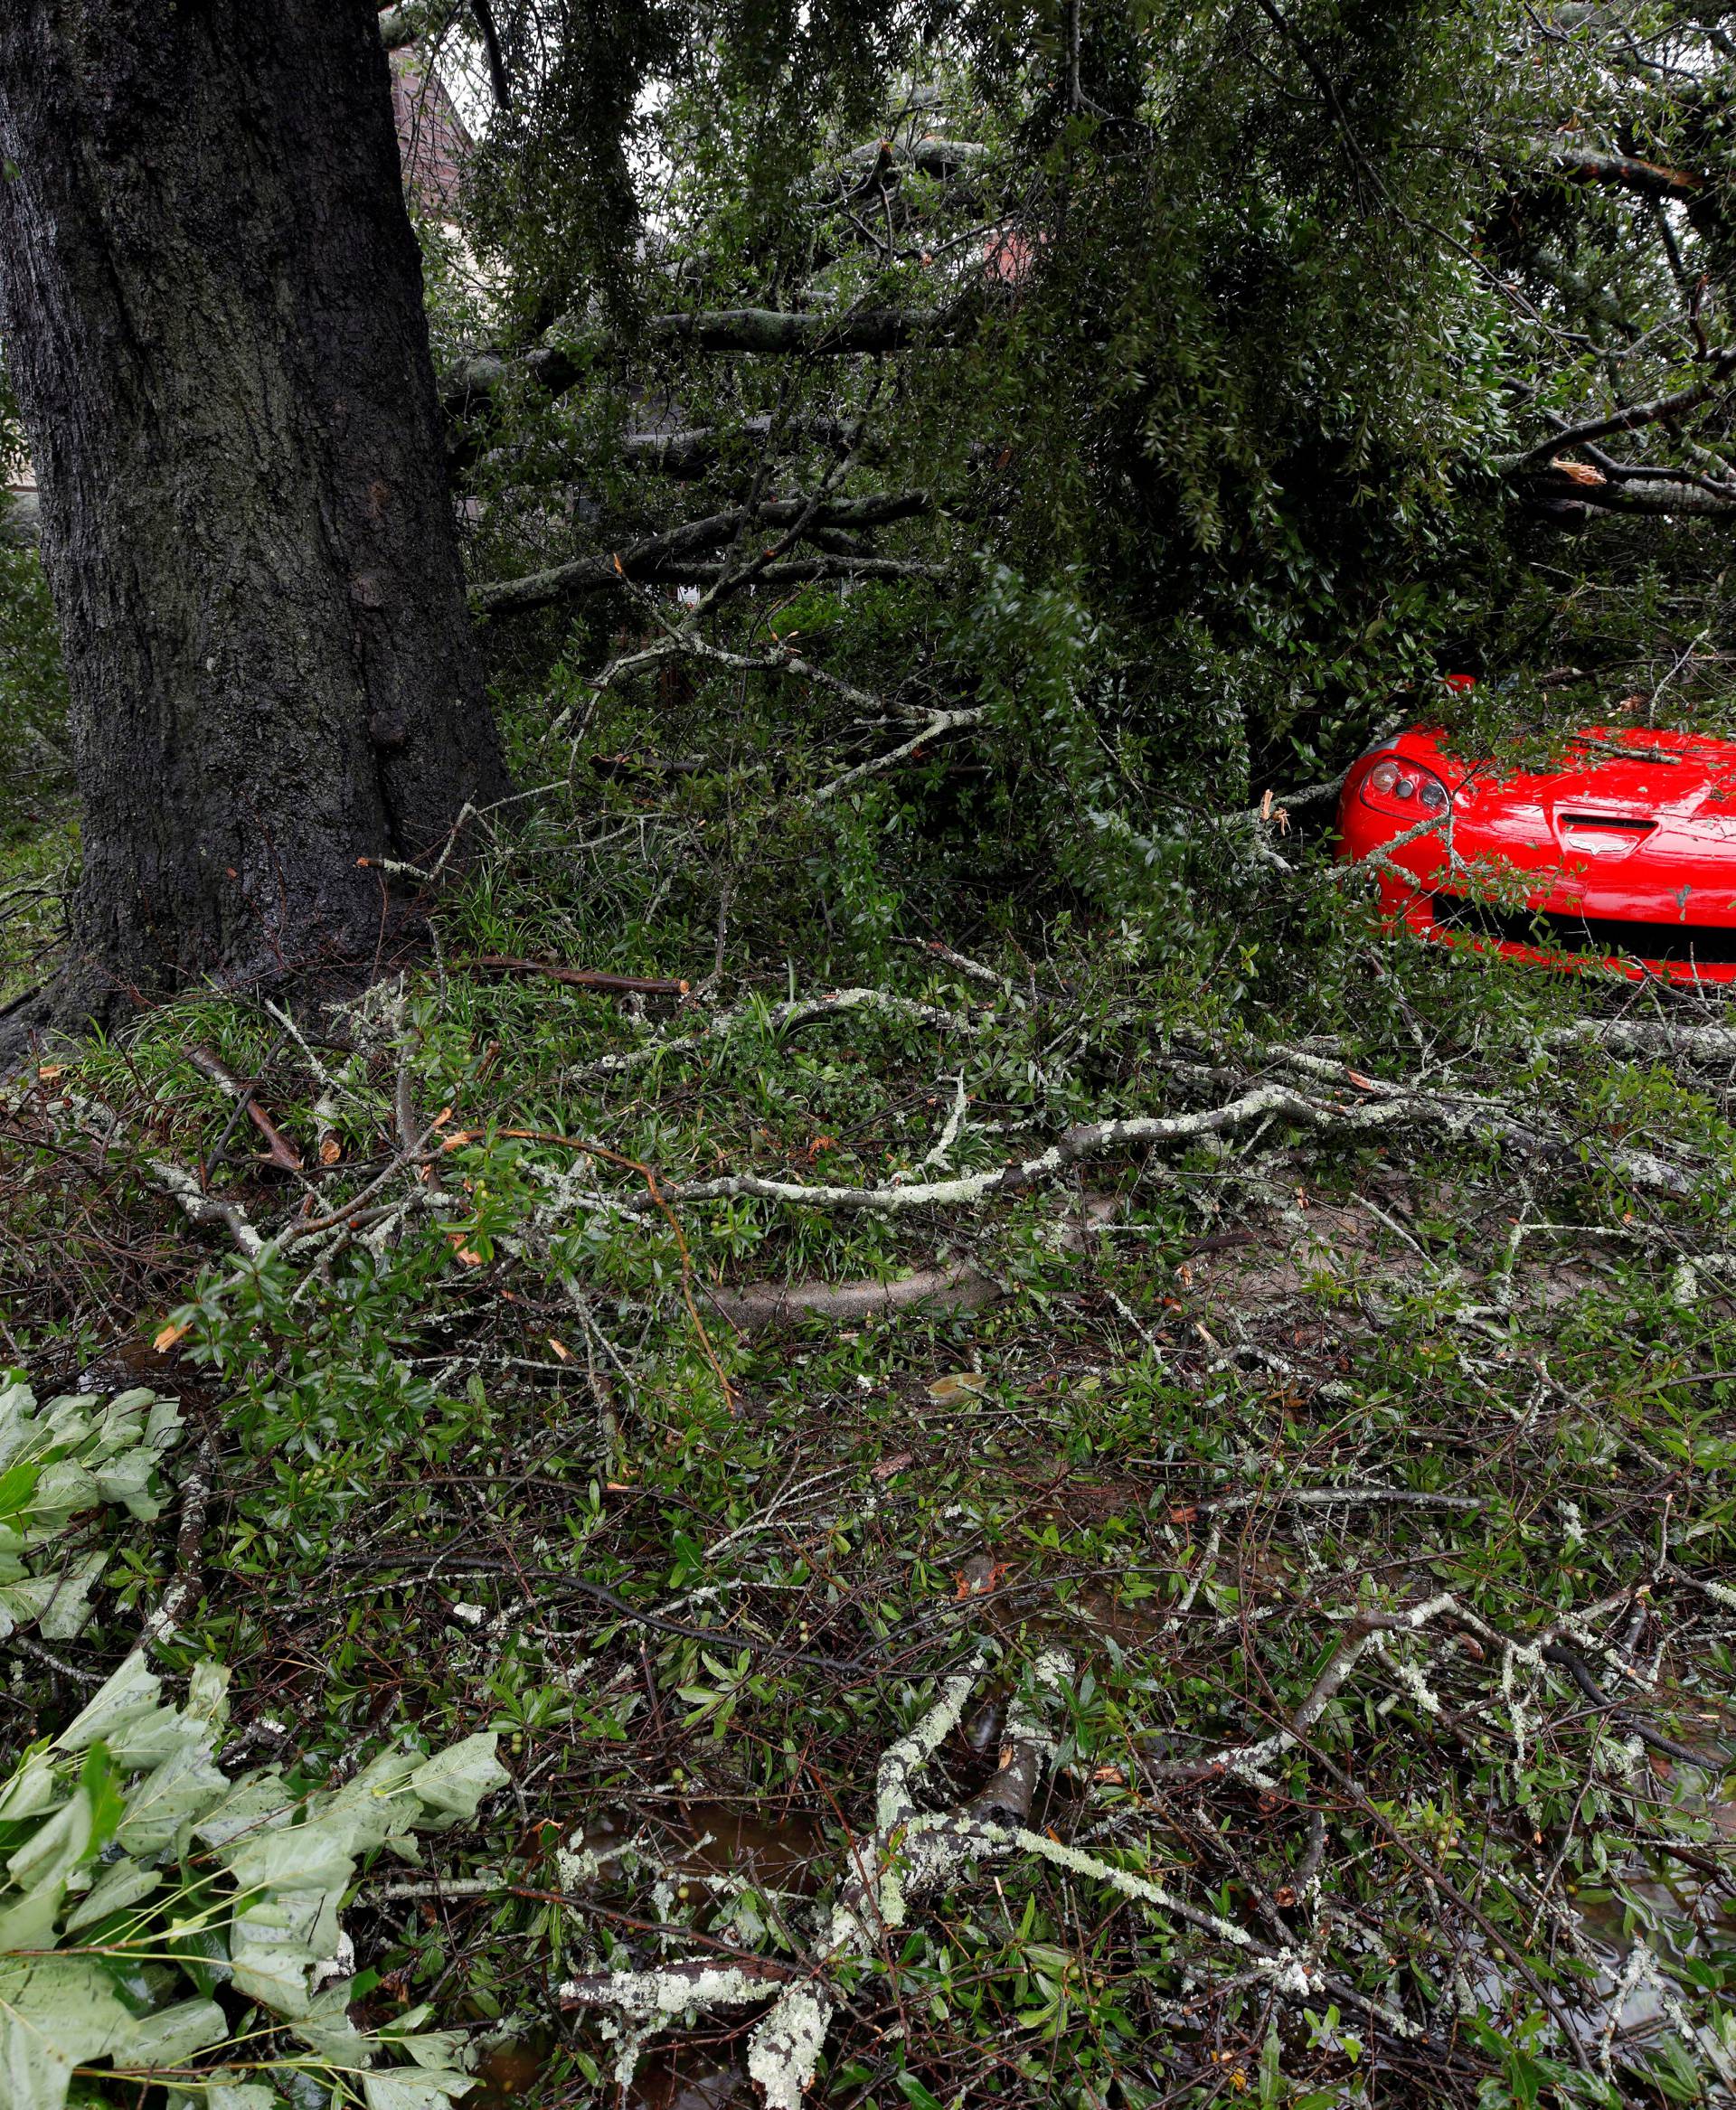 Leaves, branches and other debris surround and cover a sports car after Hurricane Florence hit Wilmington